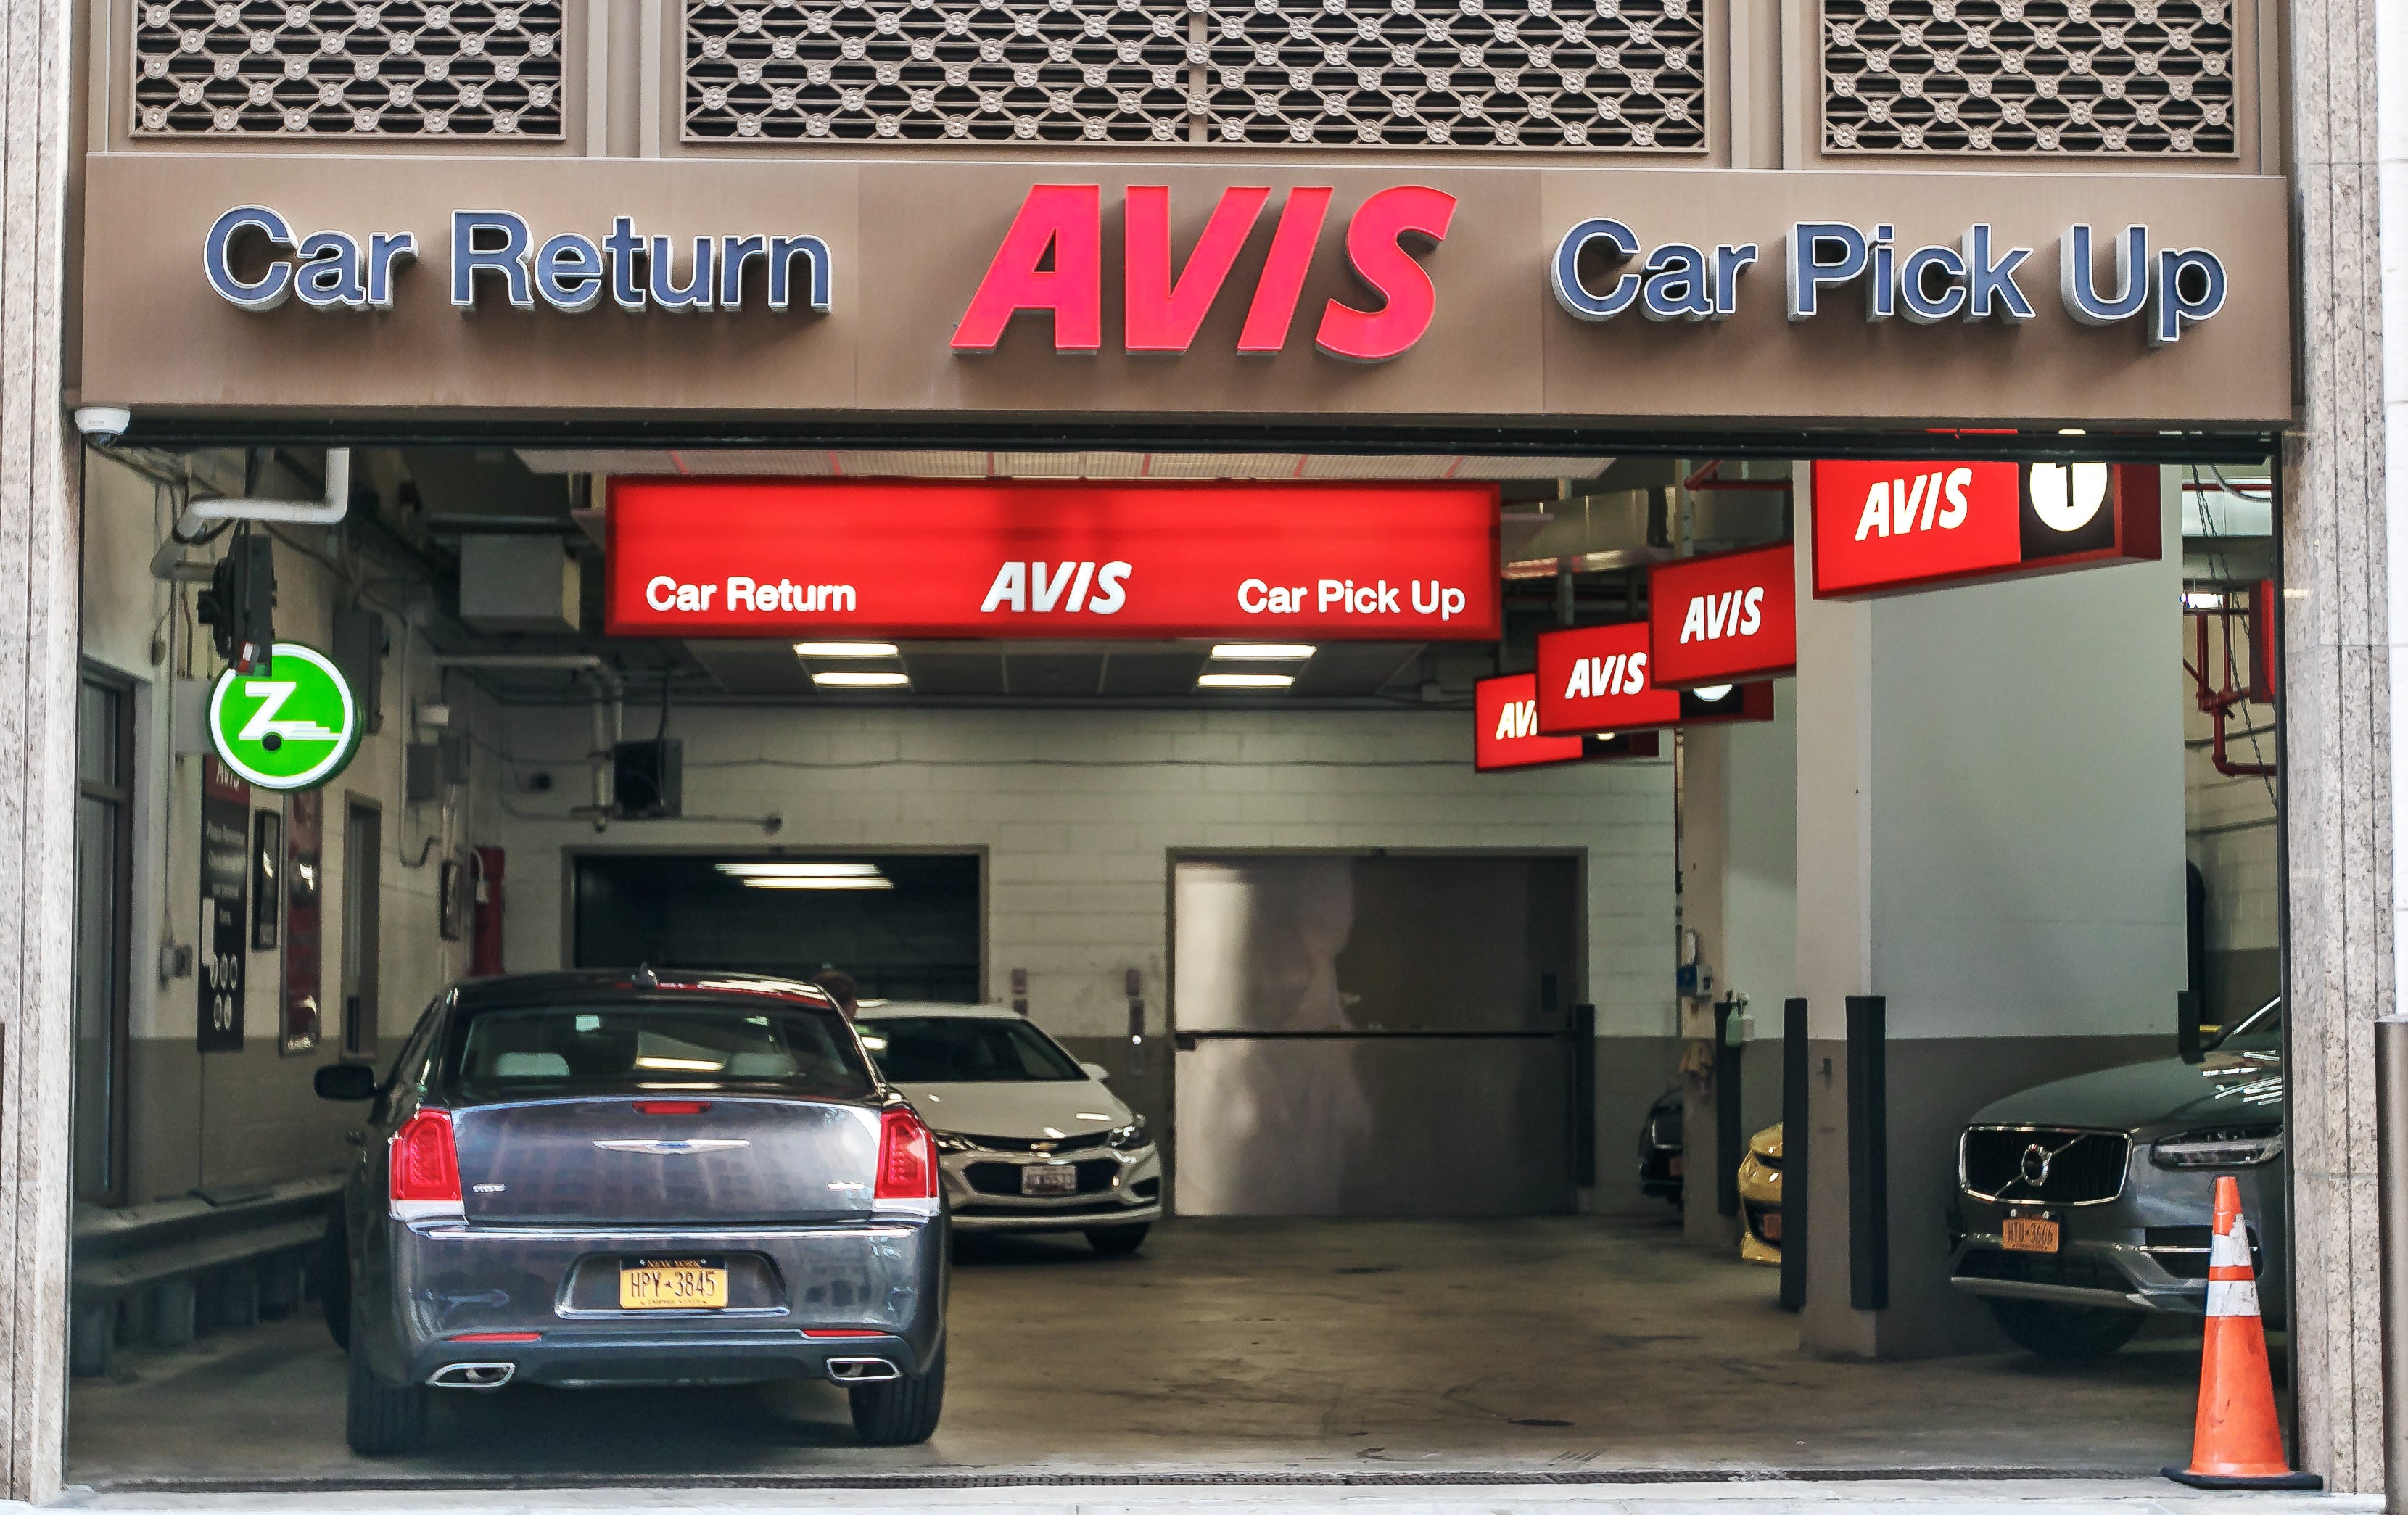 United inks new partnership with Avis, offers free status matches